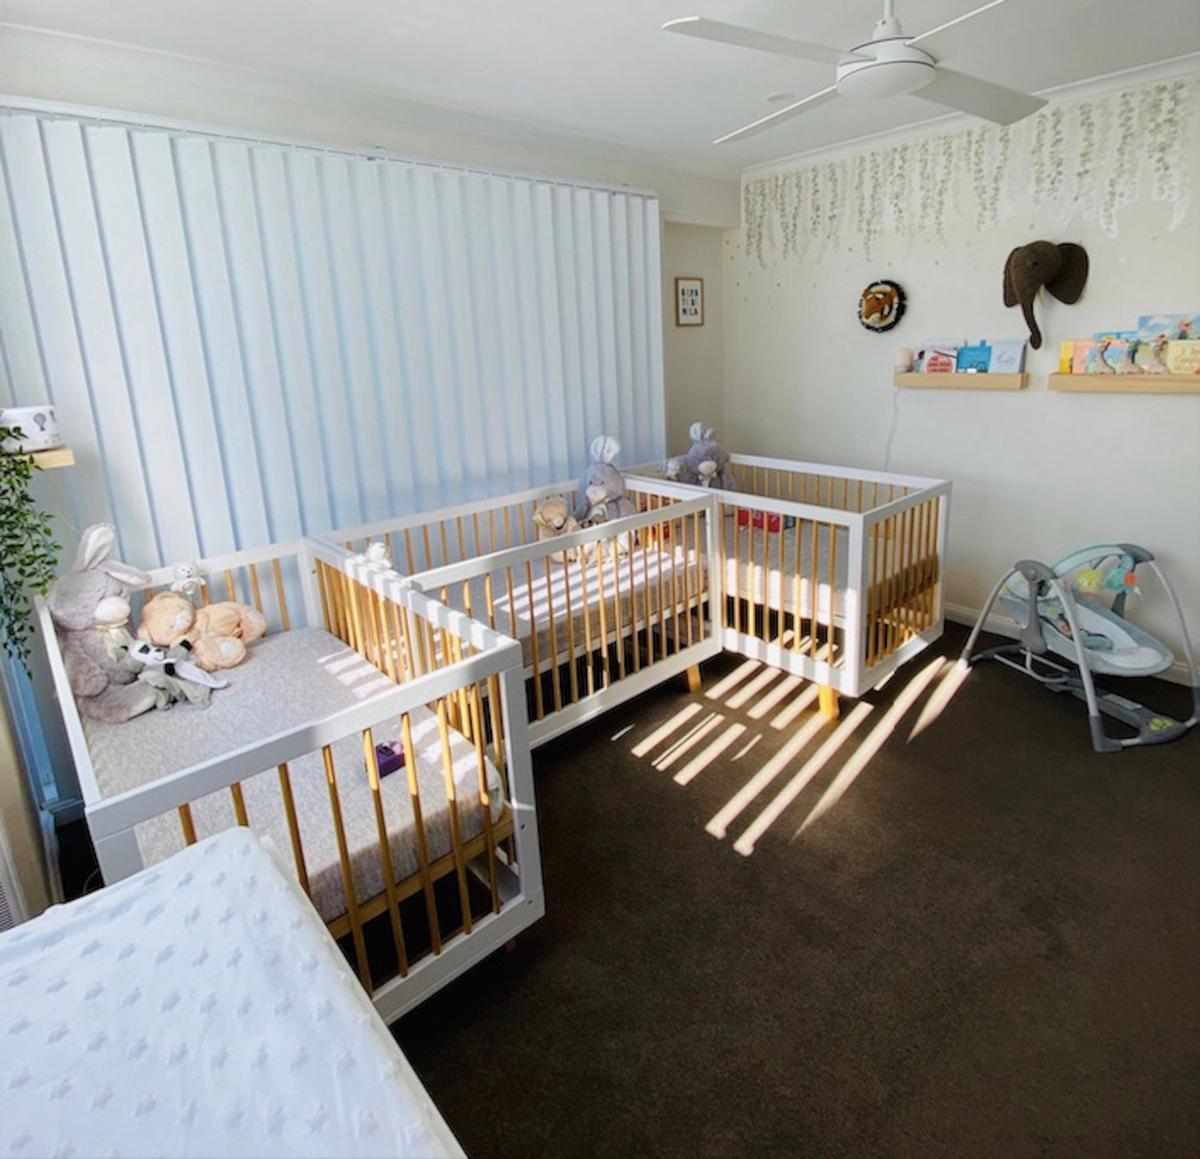 The triplets' bedroom. (Caters News)